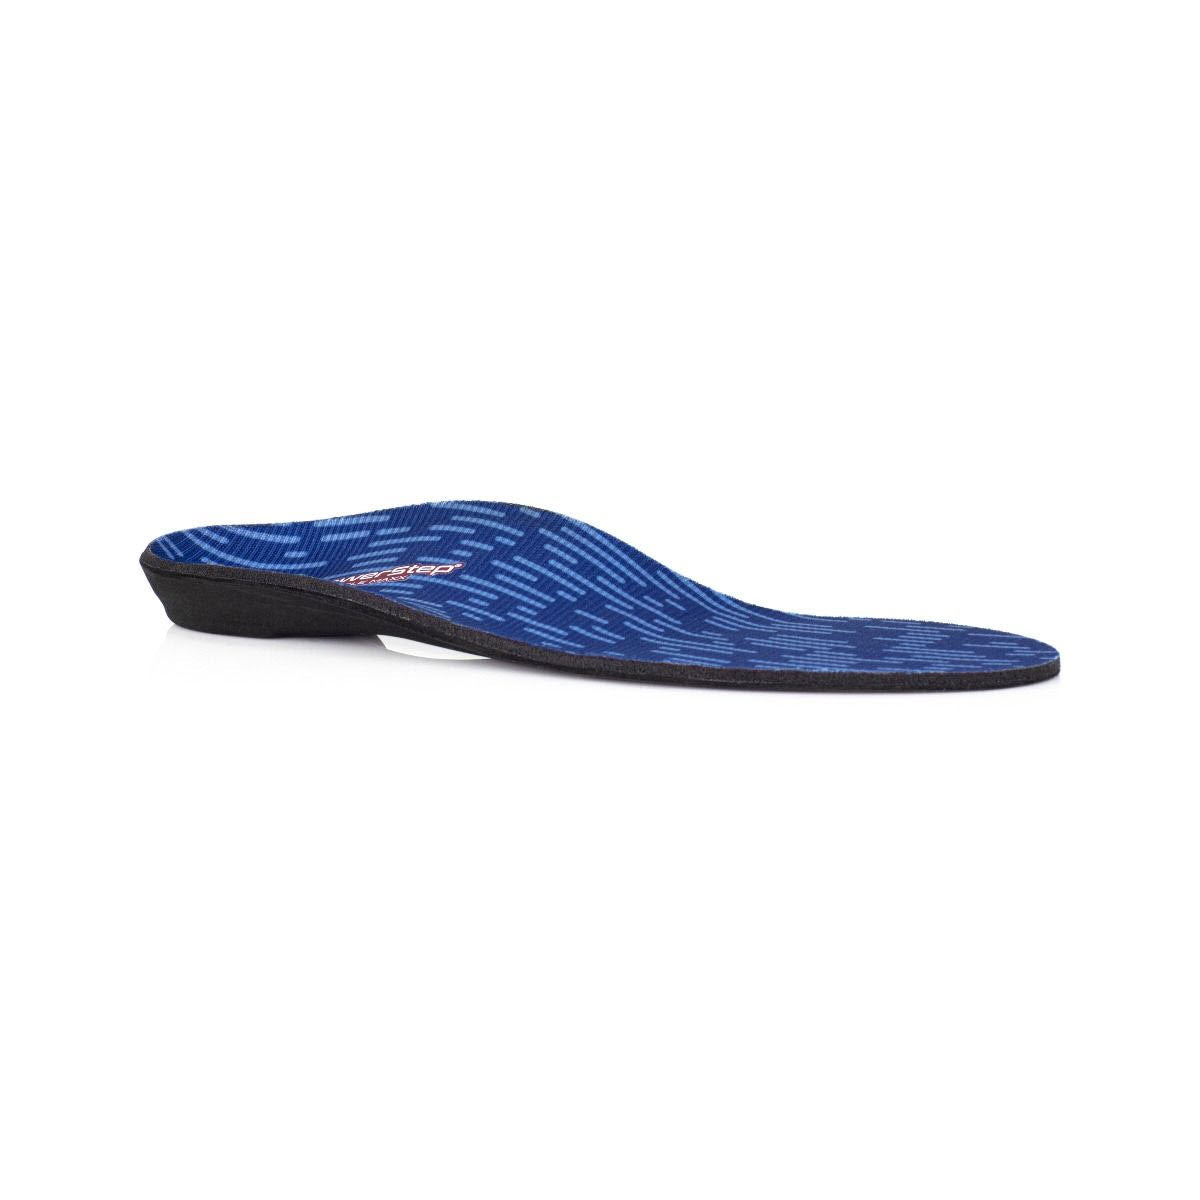 Powerstep PINNACLE MAXX SUPPORT REPLACEMENT INSOLE for arch support isolated on a white background.